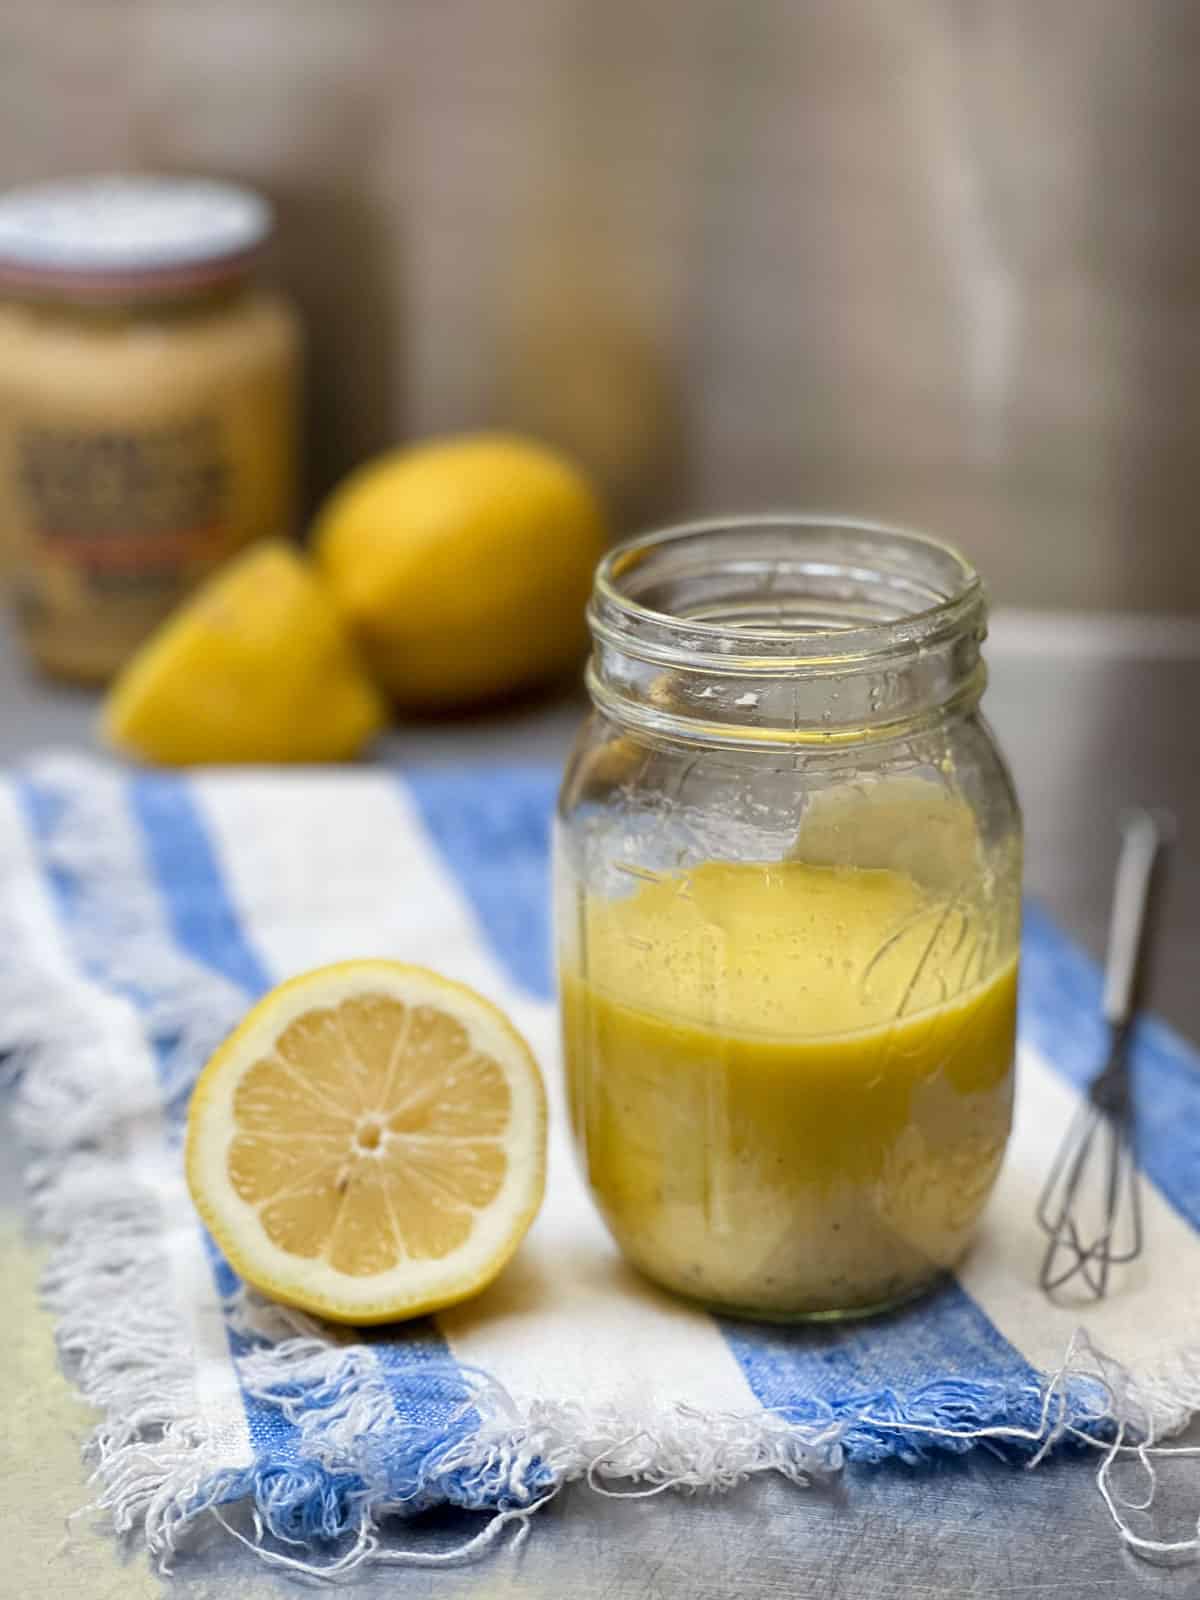 Lemon vinaigrette in a mason jar with a sliced half lemon next to it and two lemons in the background with a jar of dijon mustard.